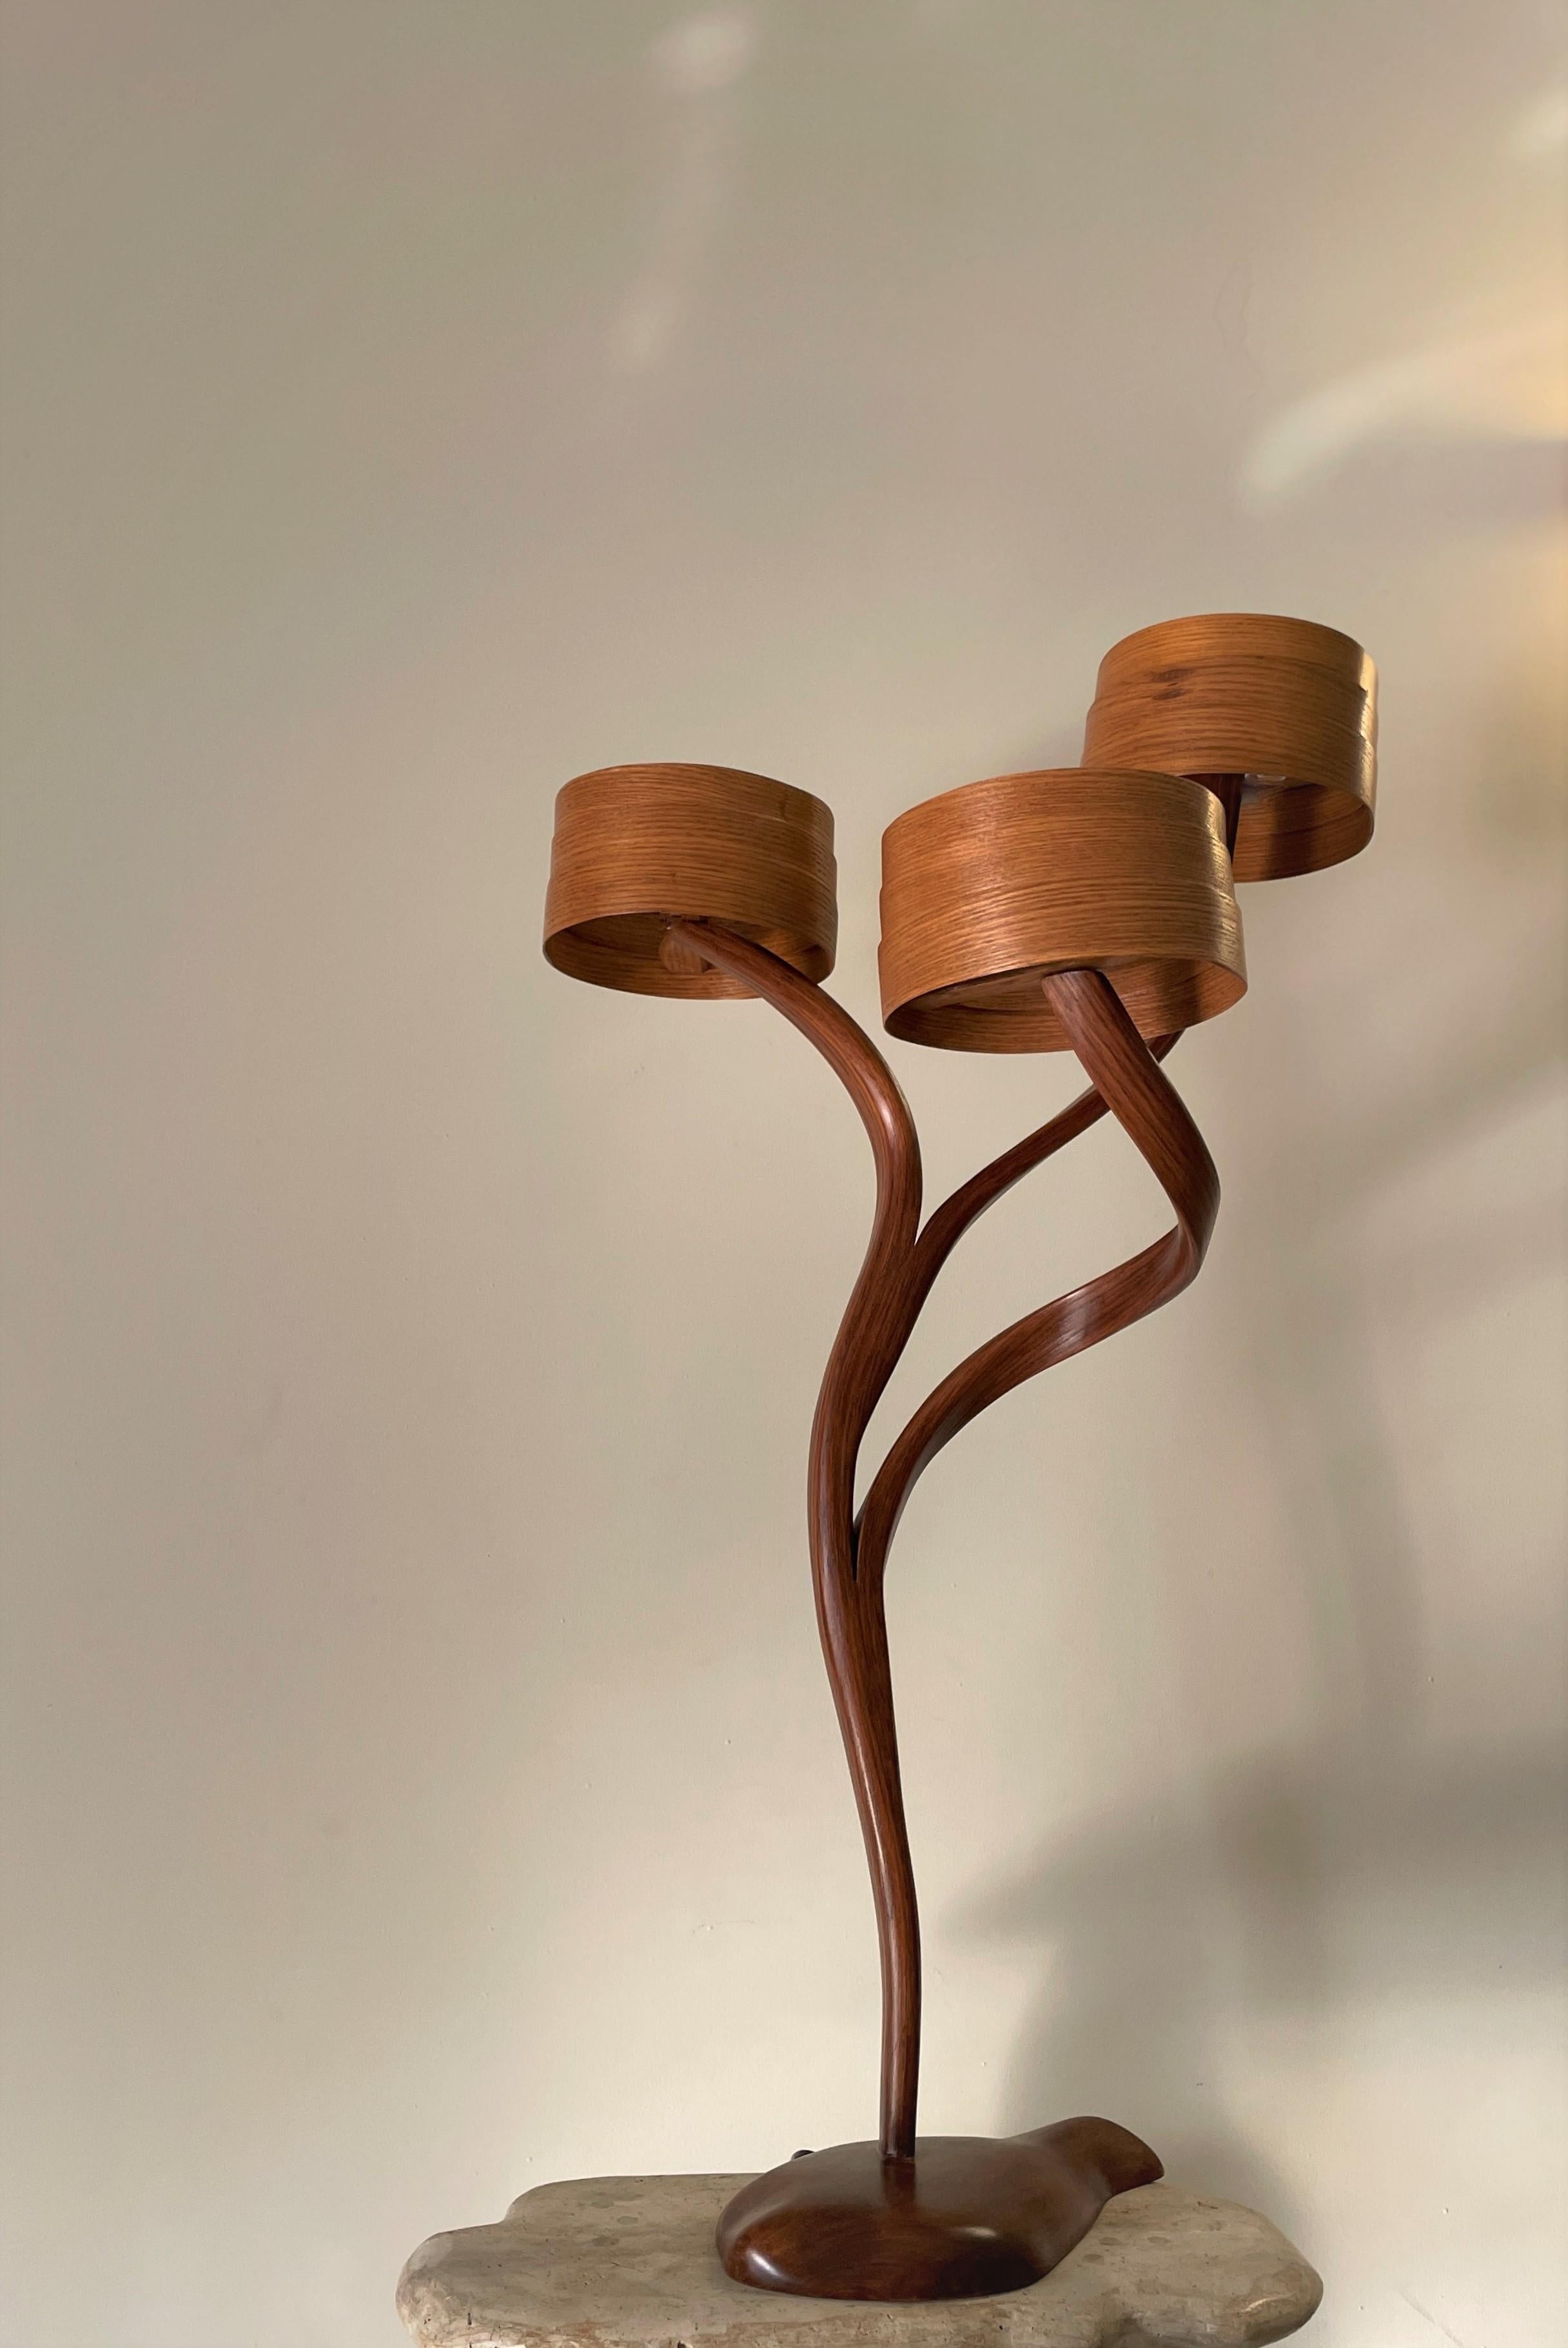 Contemporary Side Lamp No. 3 - Vrksa Series, by Raka Studio For Sale